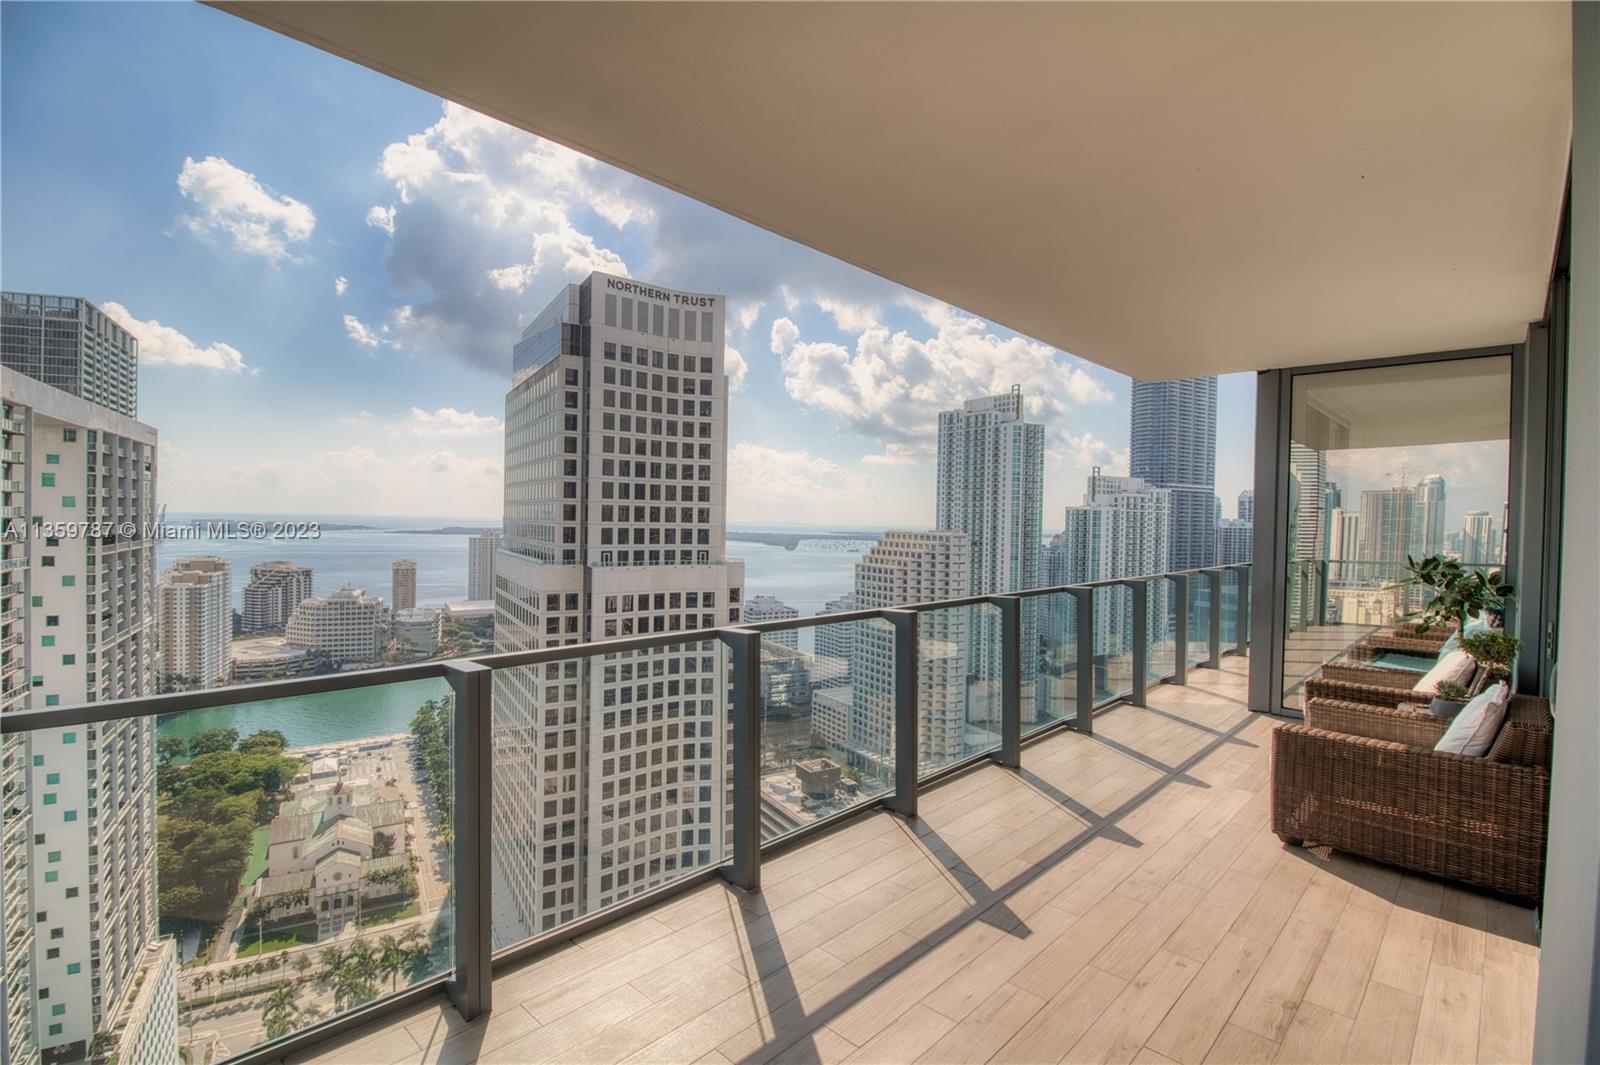 Live Limitlessly in this Contemporary Corner - a spacious corner unit w/ floor to ceiling windows & 